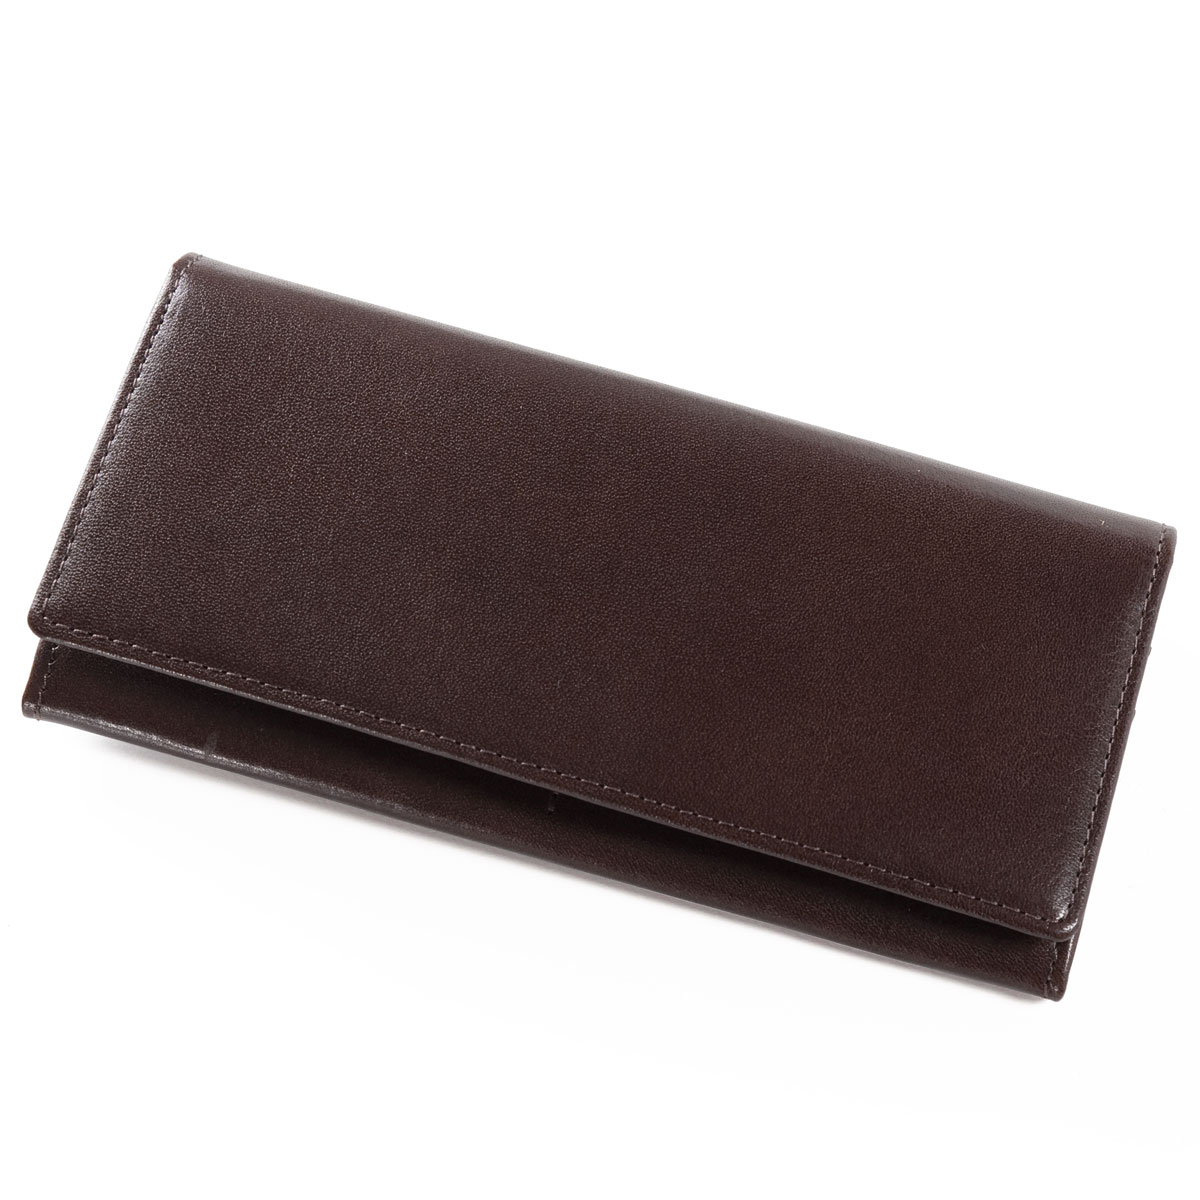 ITALY LEATHER WALLET ロングウォレット 二つ折り 長財布 ヤンキー社 レザー財布 ジーンズネシ